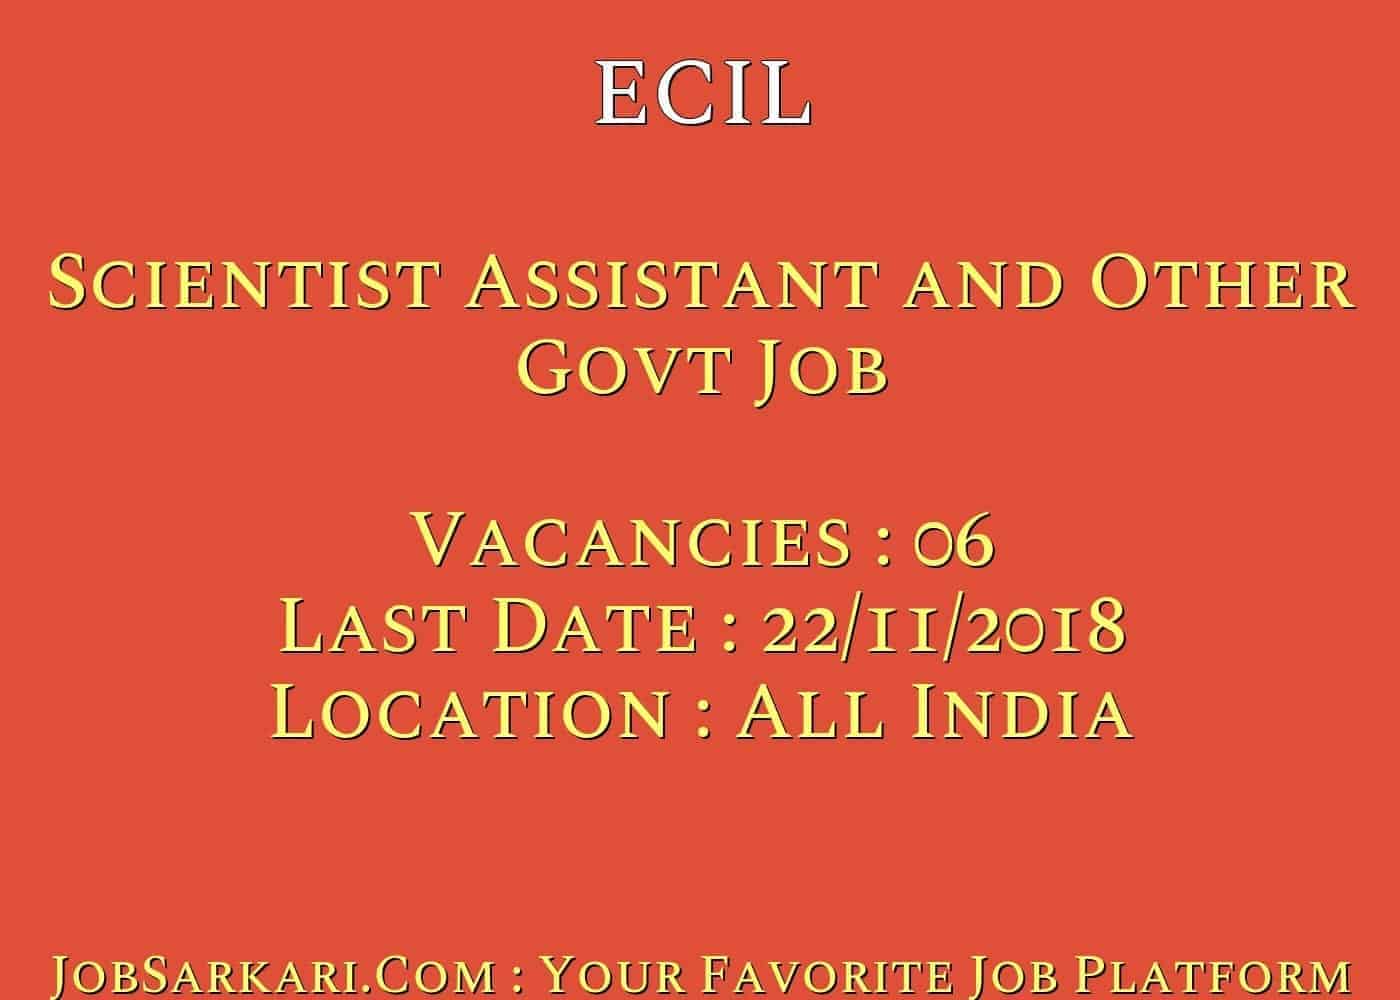 ECIL Recruitment 2018 for Scientist Assistant and Other Govt Job